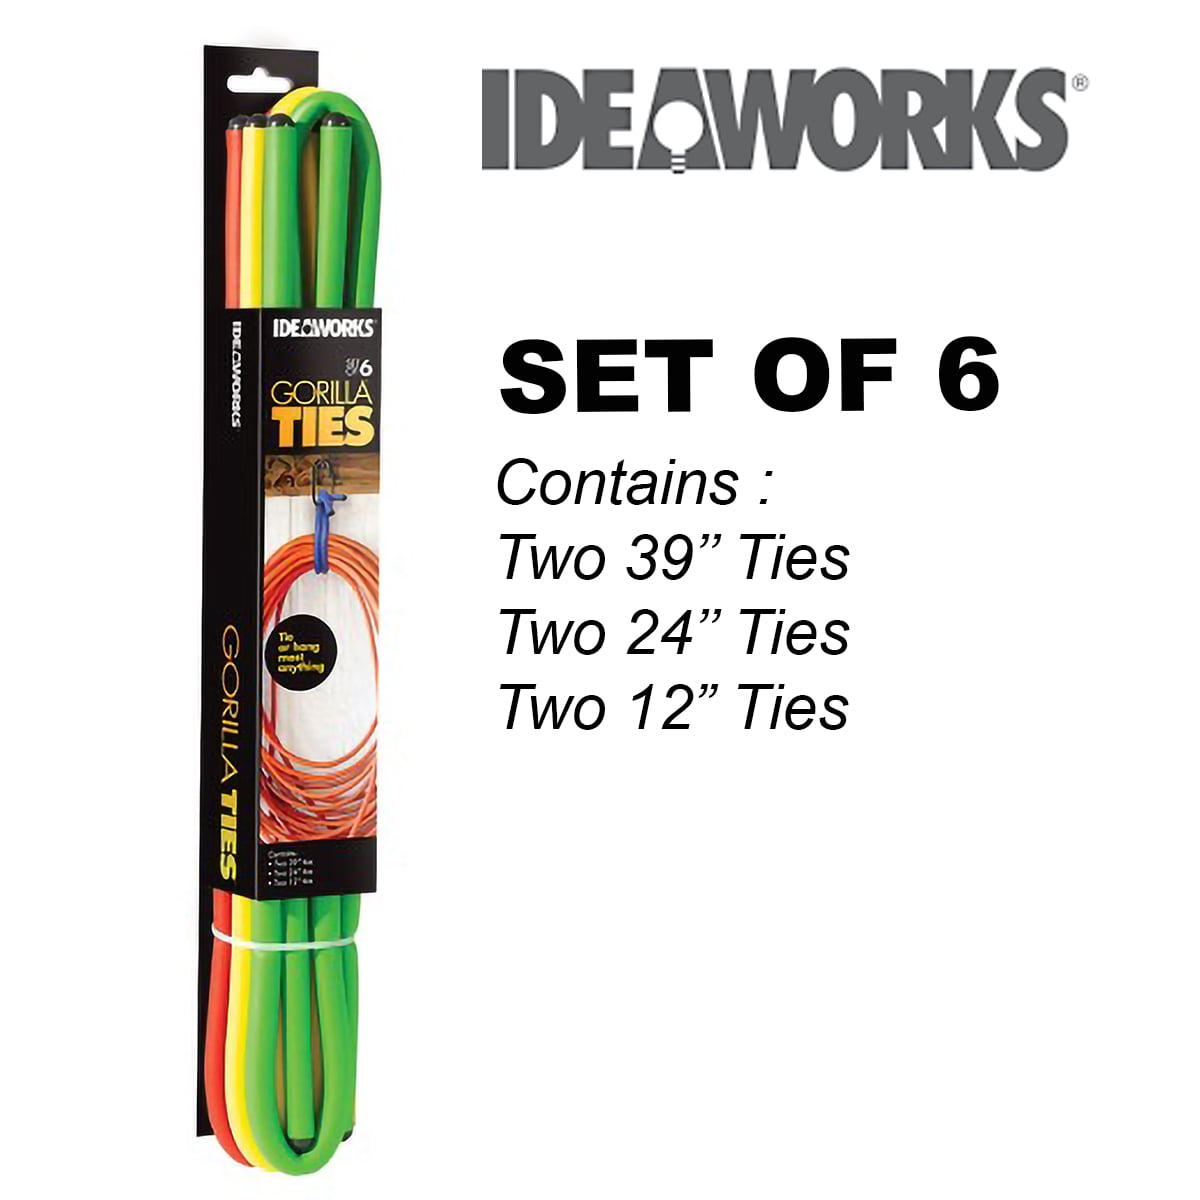 IdeaWorks Gorilla Ties - Reusable Ties for Hanging Items - Rust-Free  Material - for Indoor & Outdoor Use (6, Assorted Length) 2-39 / 2-24' /  2-12